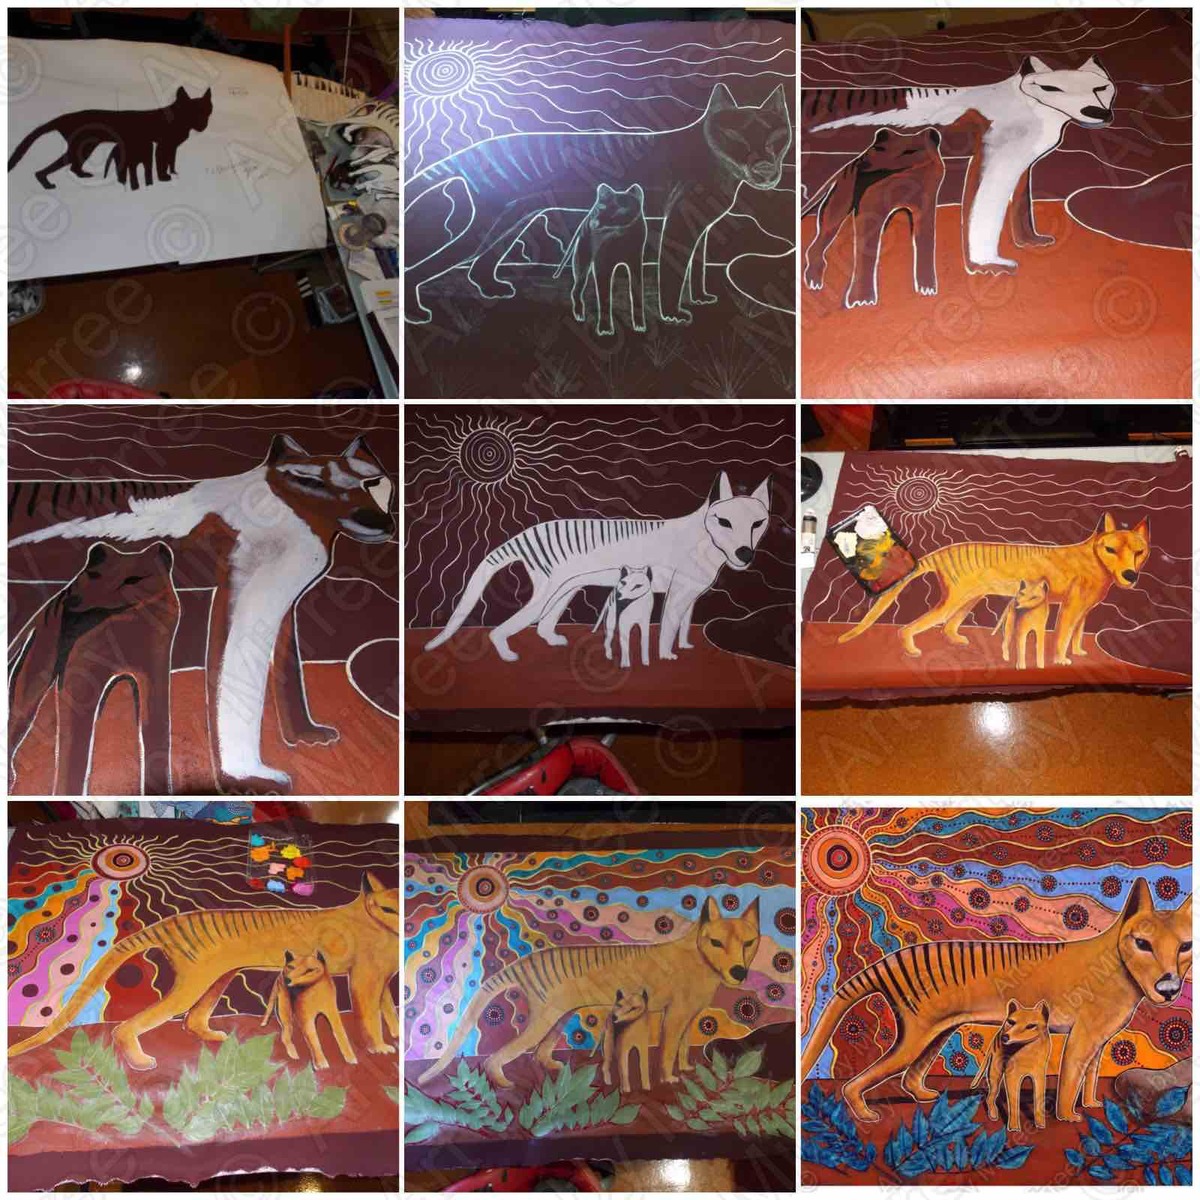 Tasmanian Tiger ~ Aussie Icons - Dreamtime Collection is now available - make me an offer, for the 1st time in 10 years #indigenous #contemporaryart #artcollectors #Australia #thylacine #extinction #fineart artworksbymirree.com